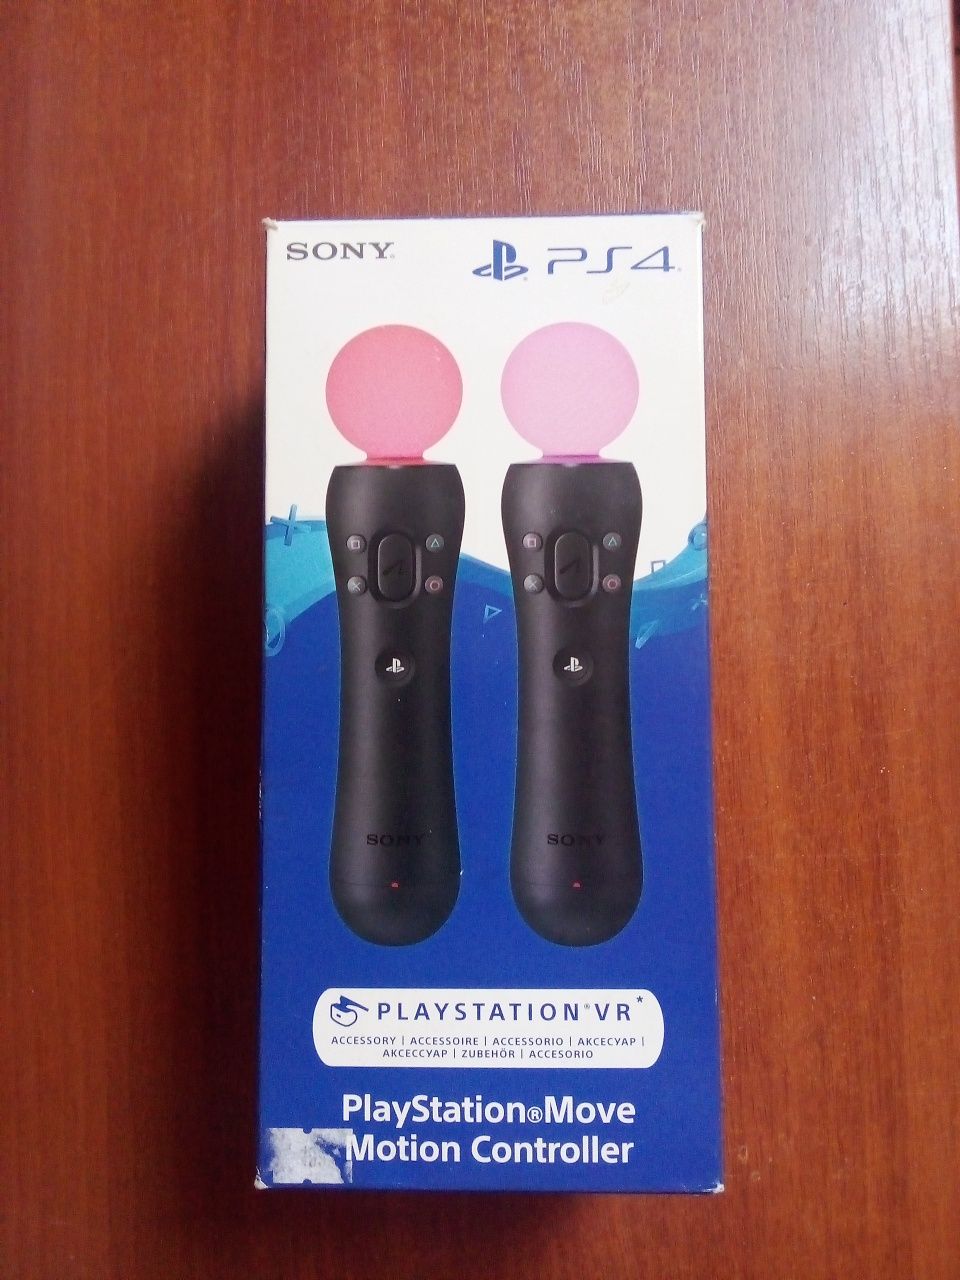 PlayStarion Move Motion Controller